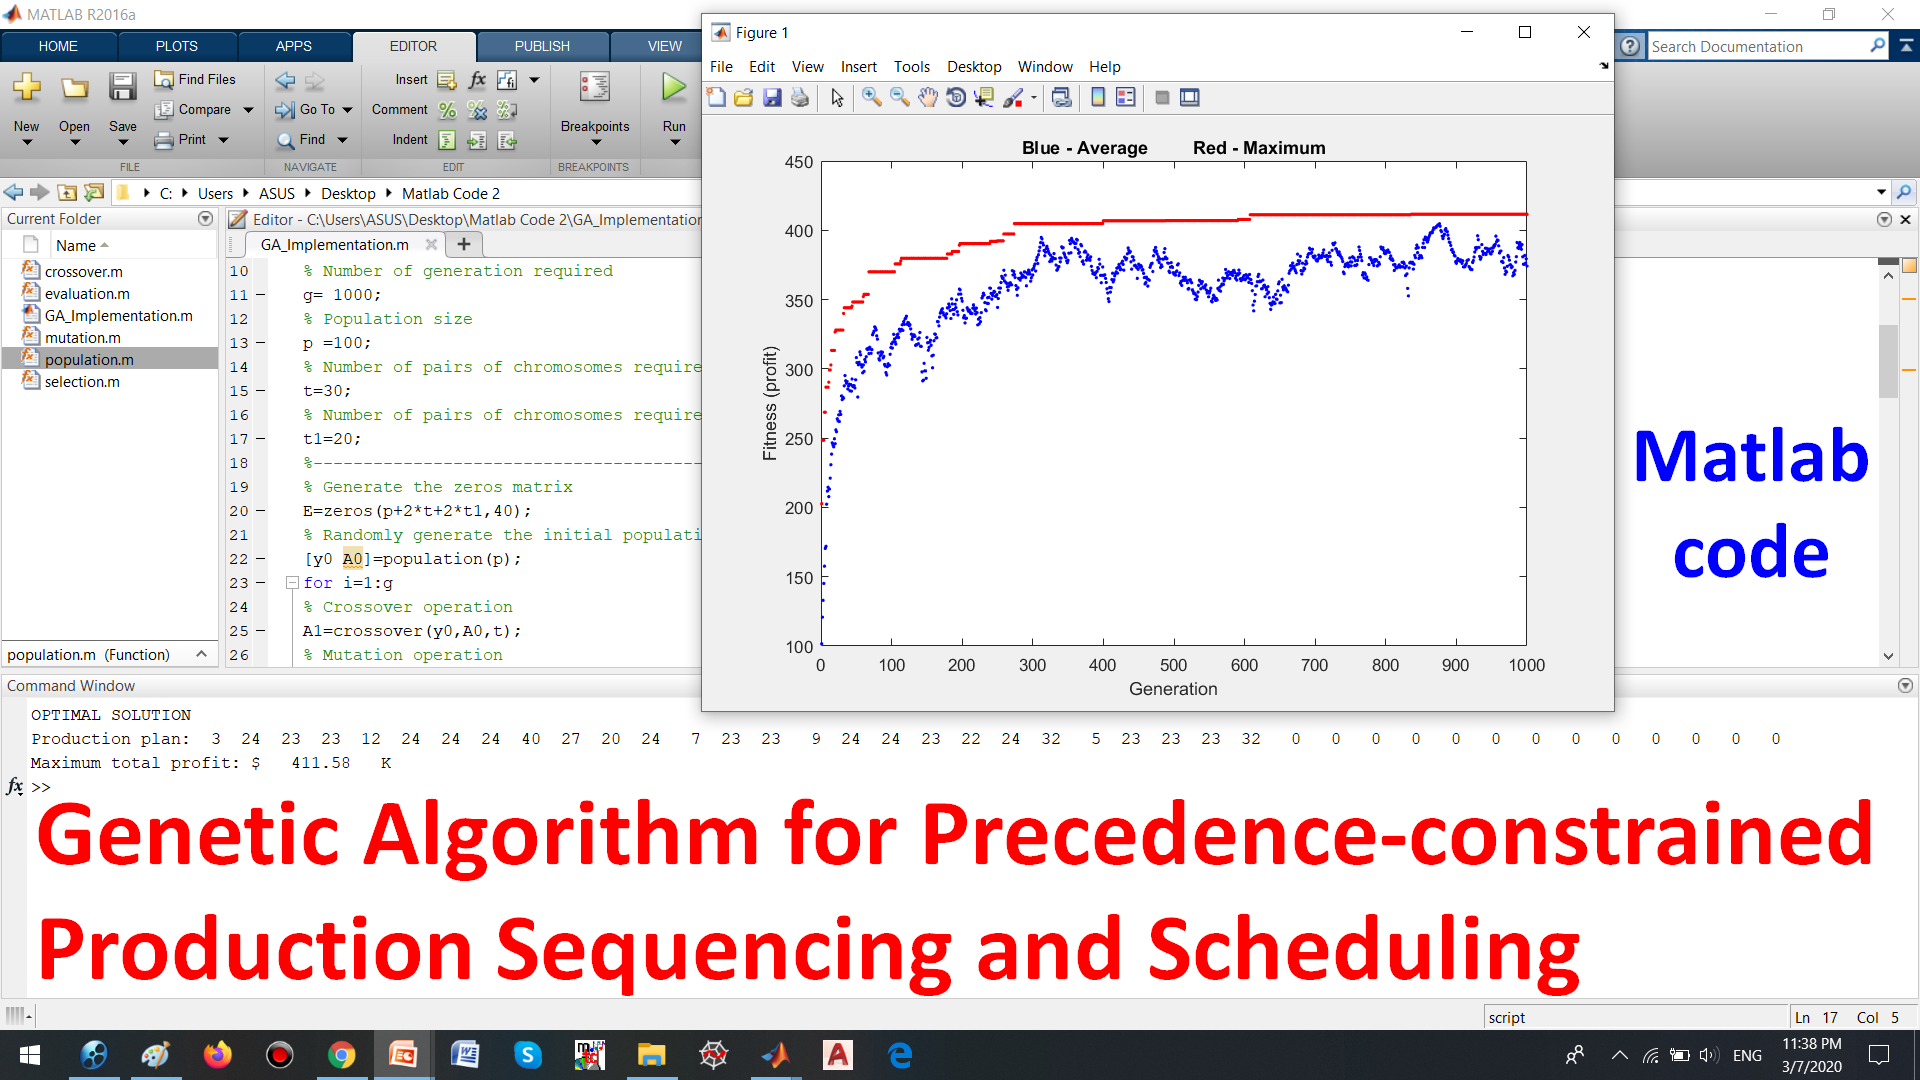 Matlab Code of Genetic Algorithm for Precedence-constrained Production Sequencing and Scheduling